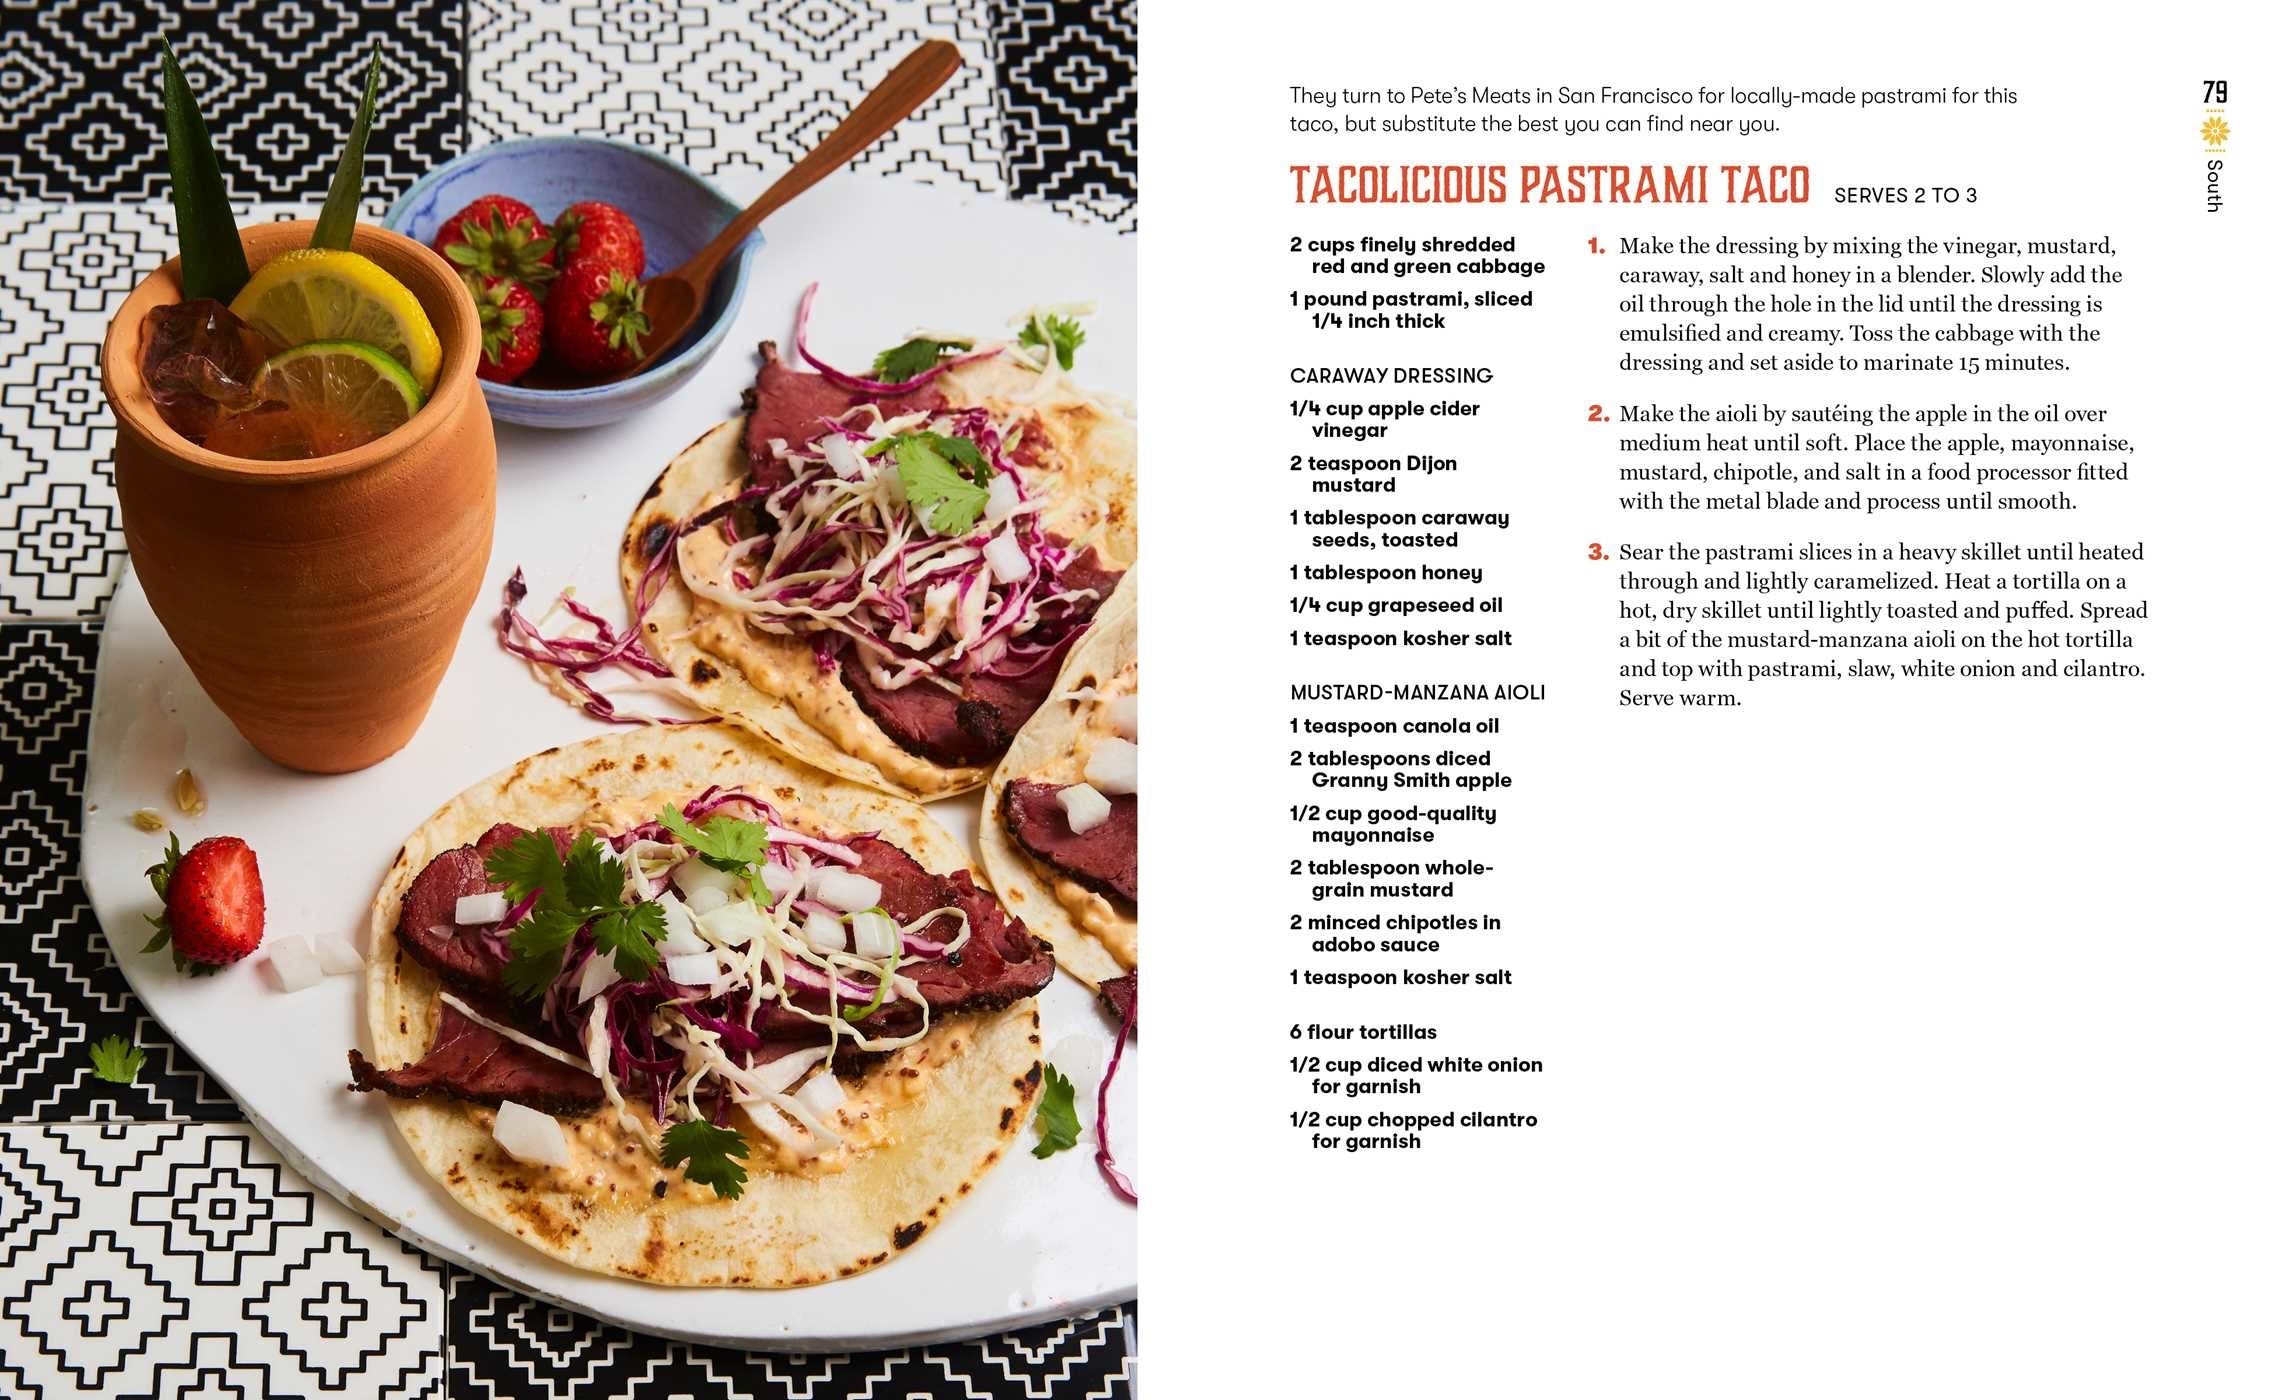 Tequila and Tacos - A Guide to Spirited Pairings